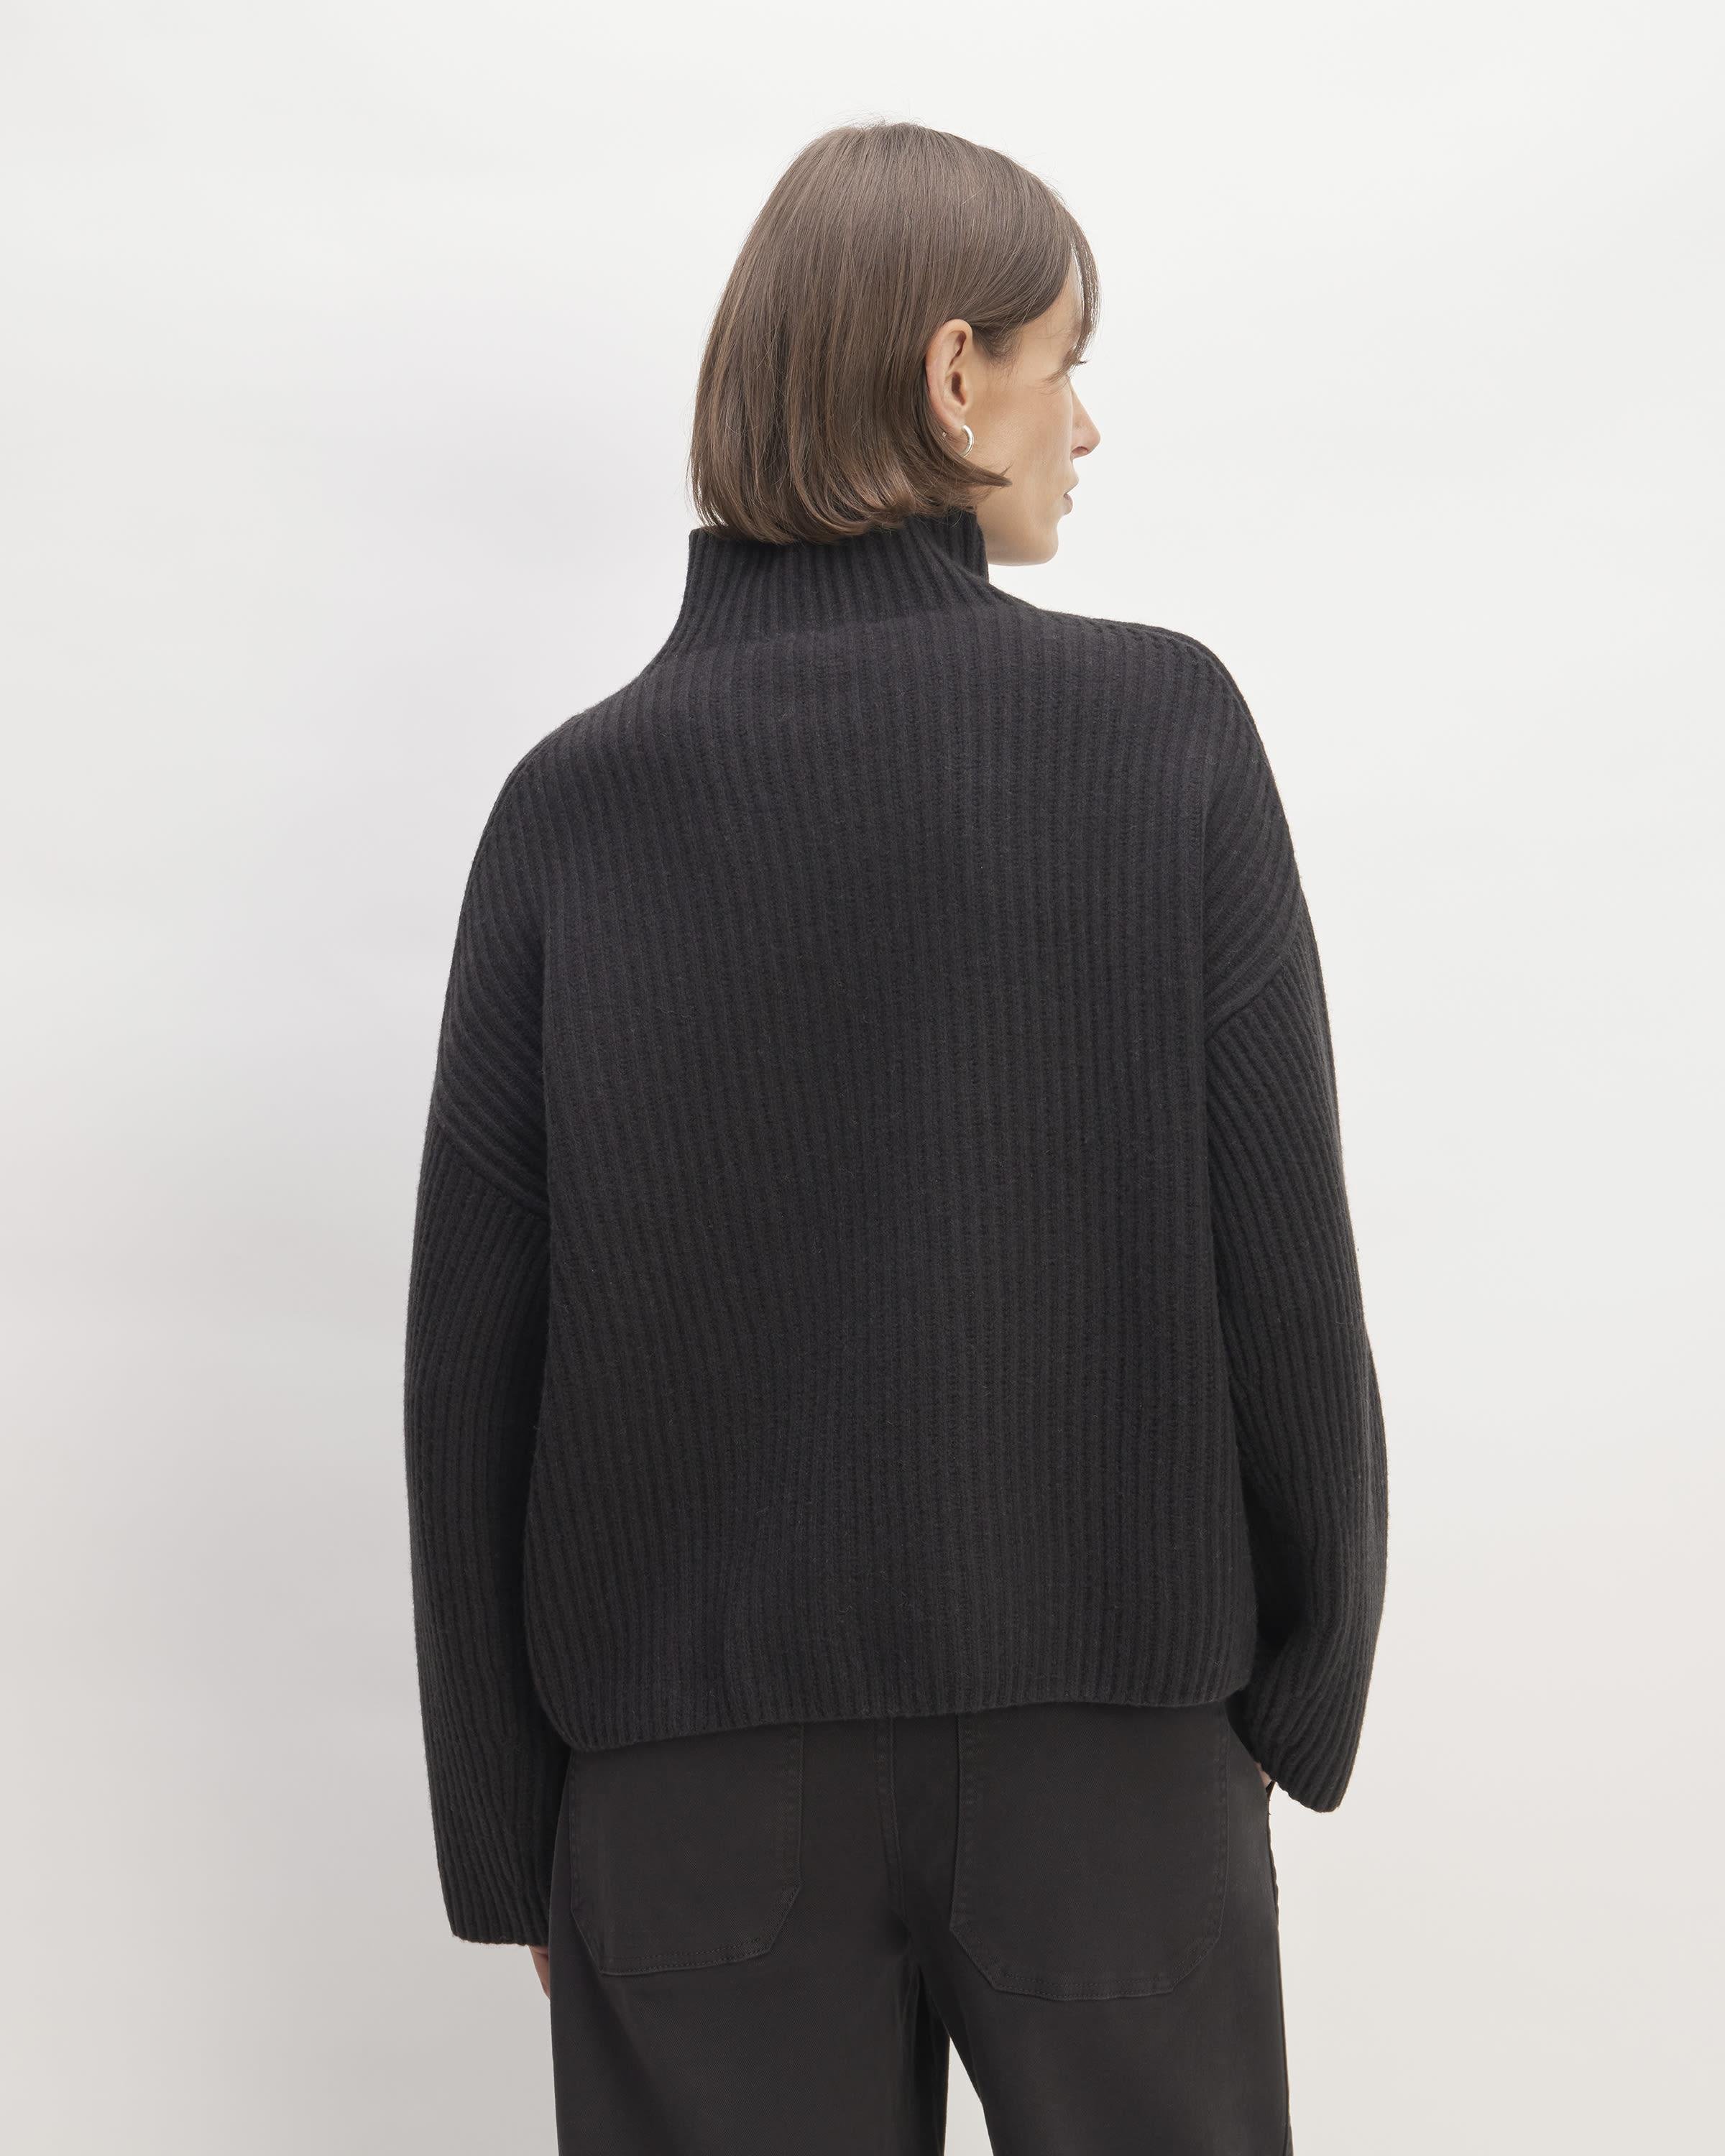 The Felted Merino Funnel-Neck Pullover by EVERLANE